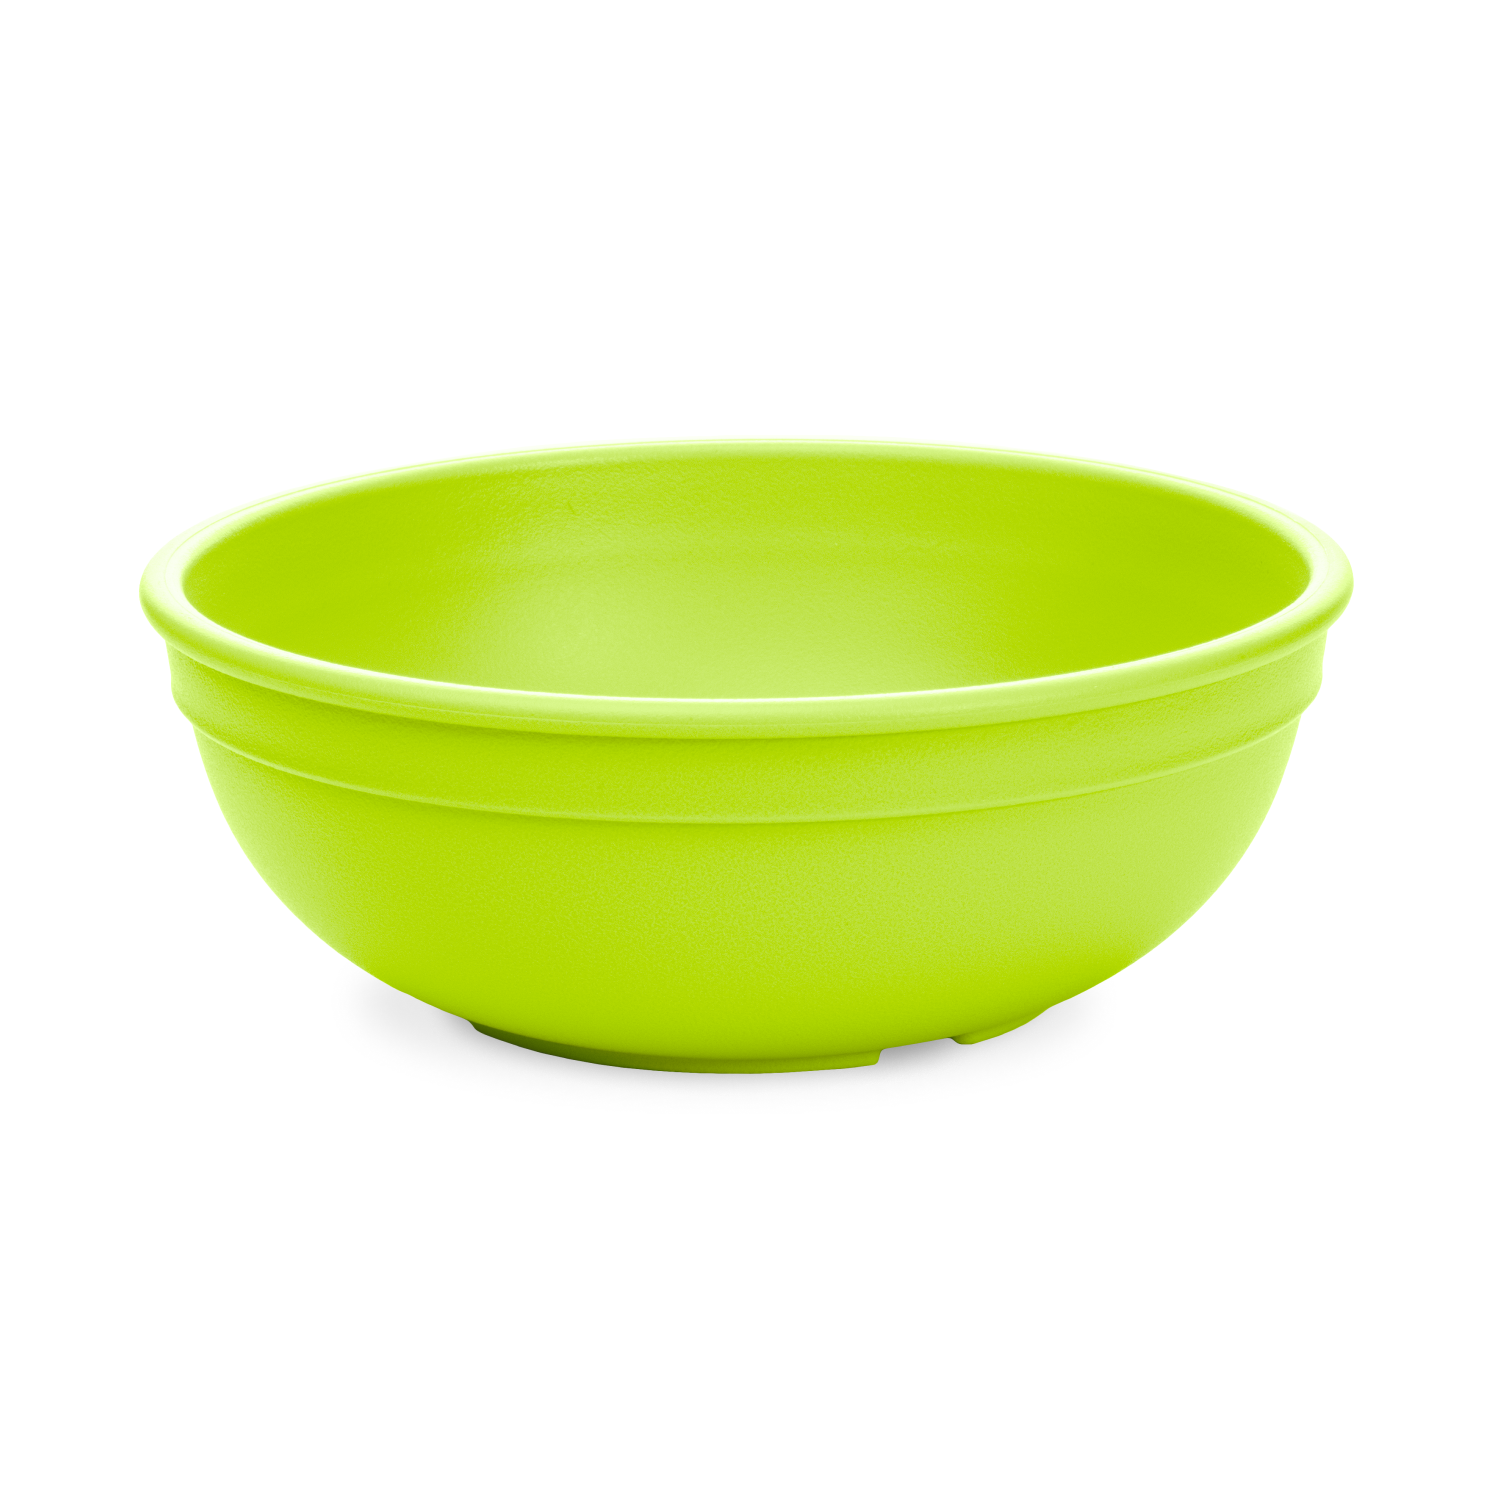 Progressive International CB-20 Storage Bowls with Lids, Set of 3, teal,  green and red